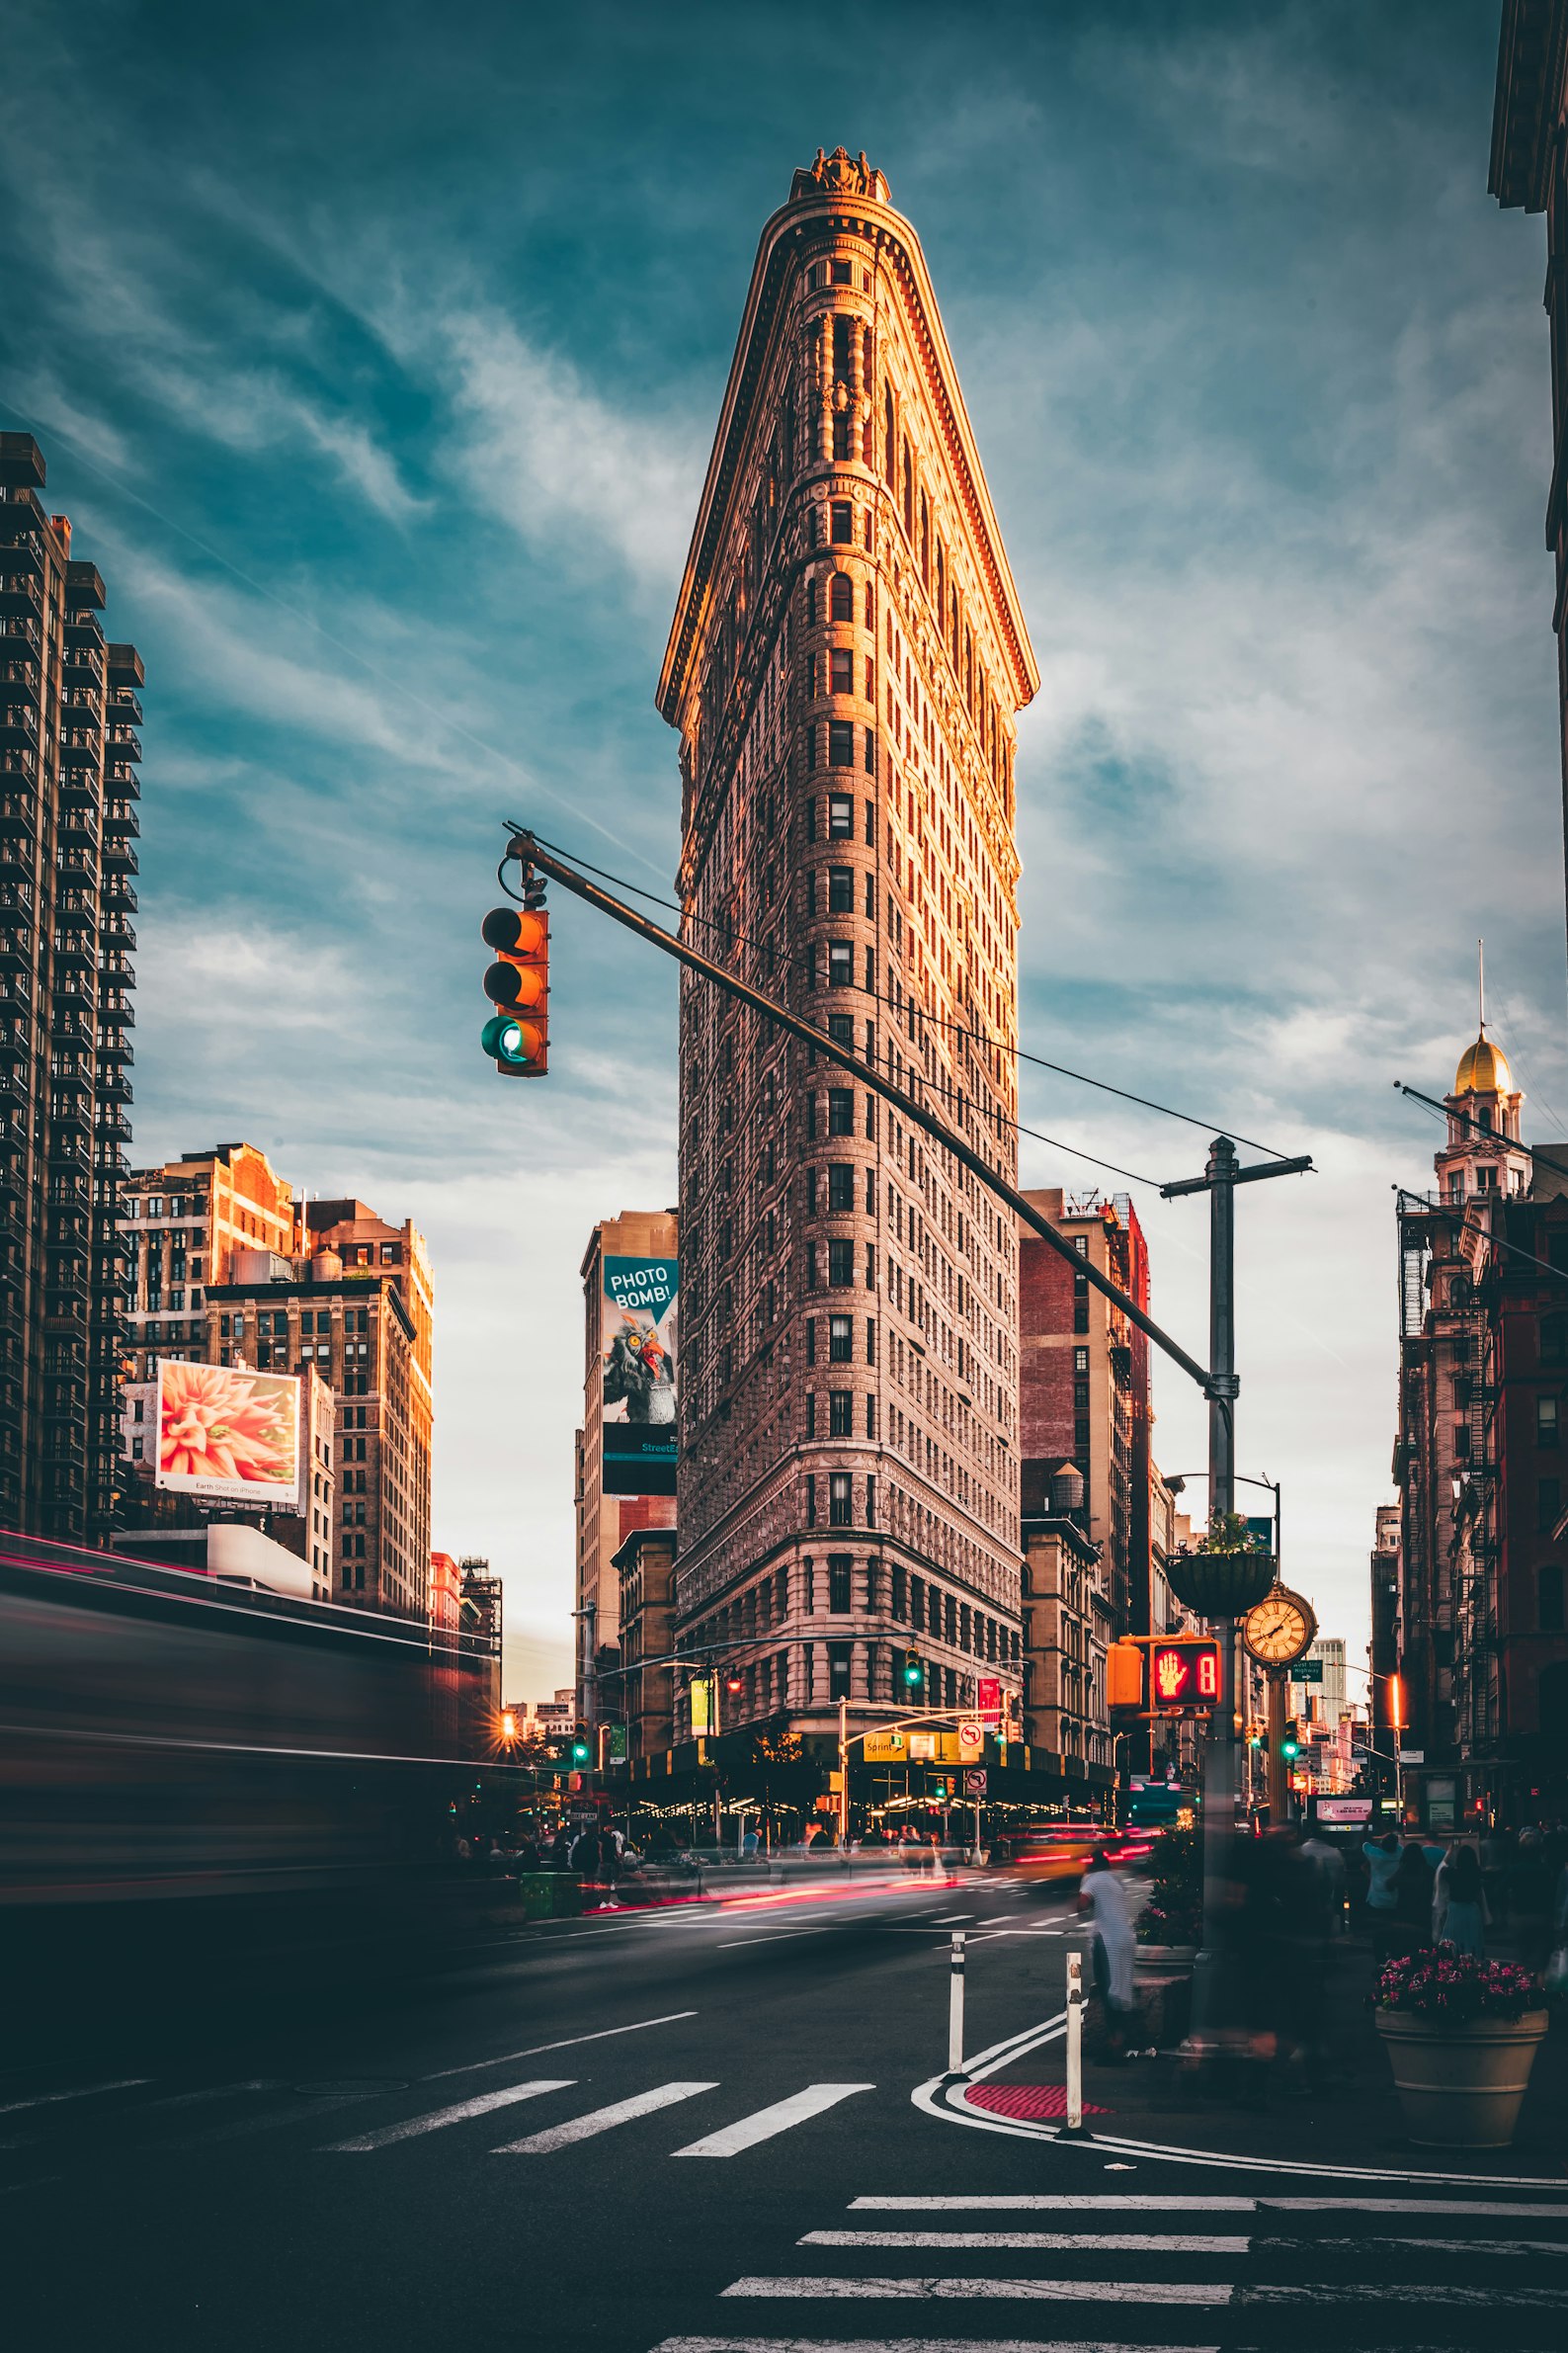 Flatiron Building on a clear day.